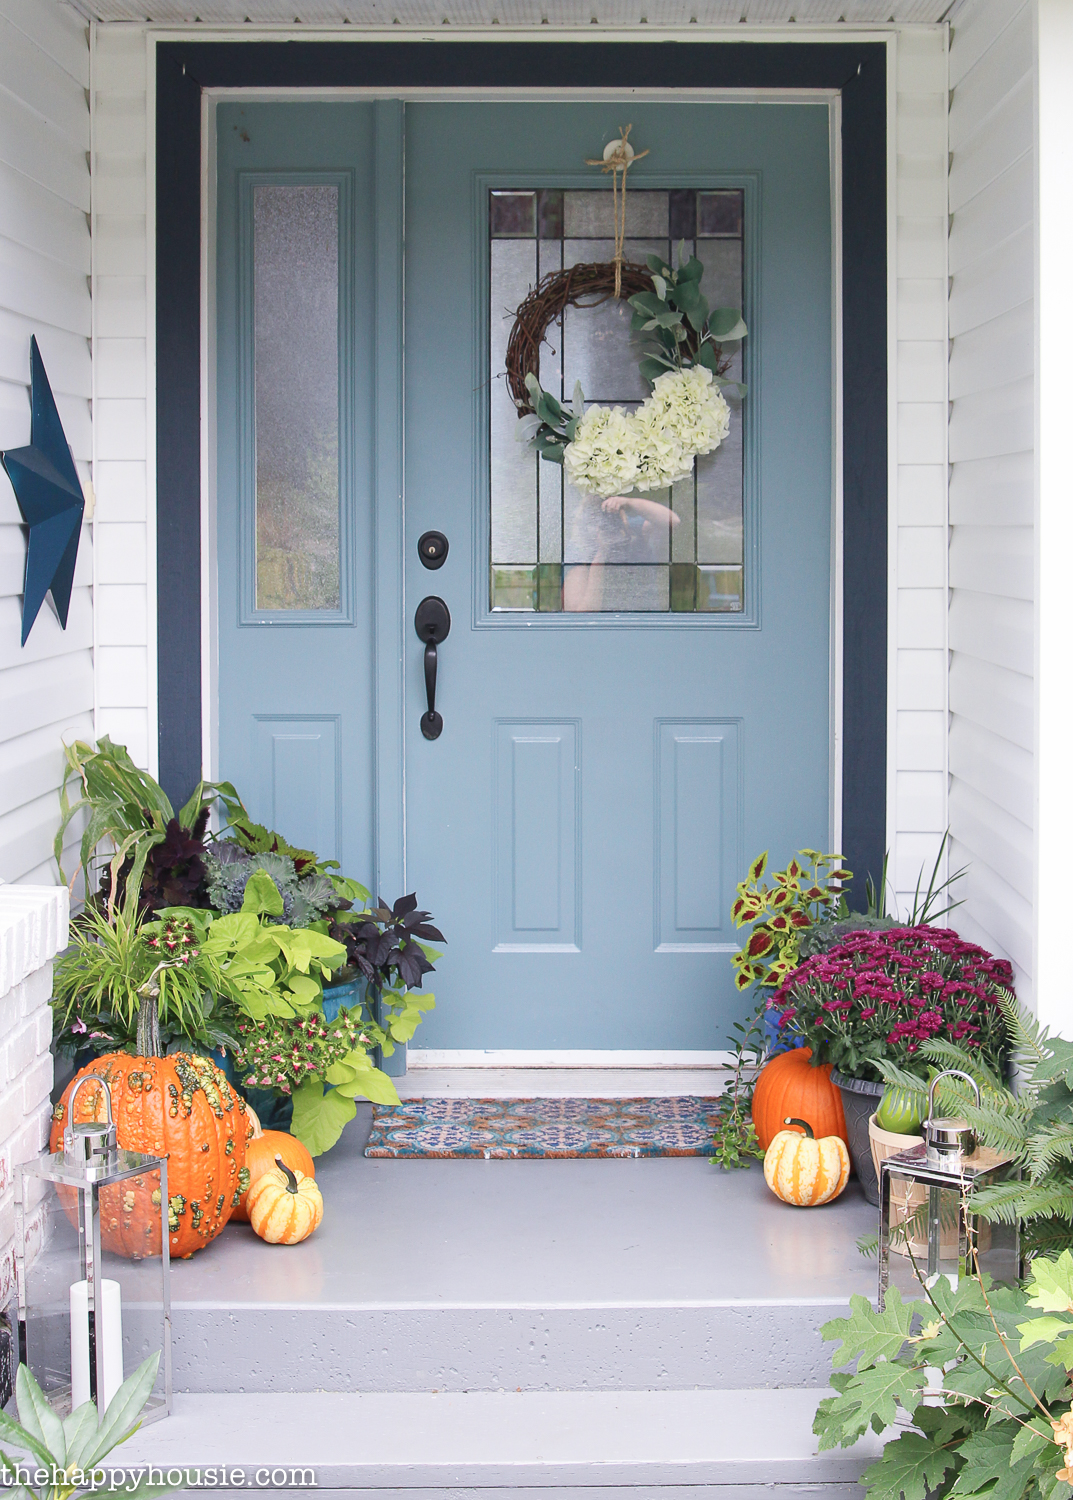 A light blue front door surrounded by flowers, greenery and pumpkins.   There is a fall wreath on the door.